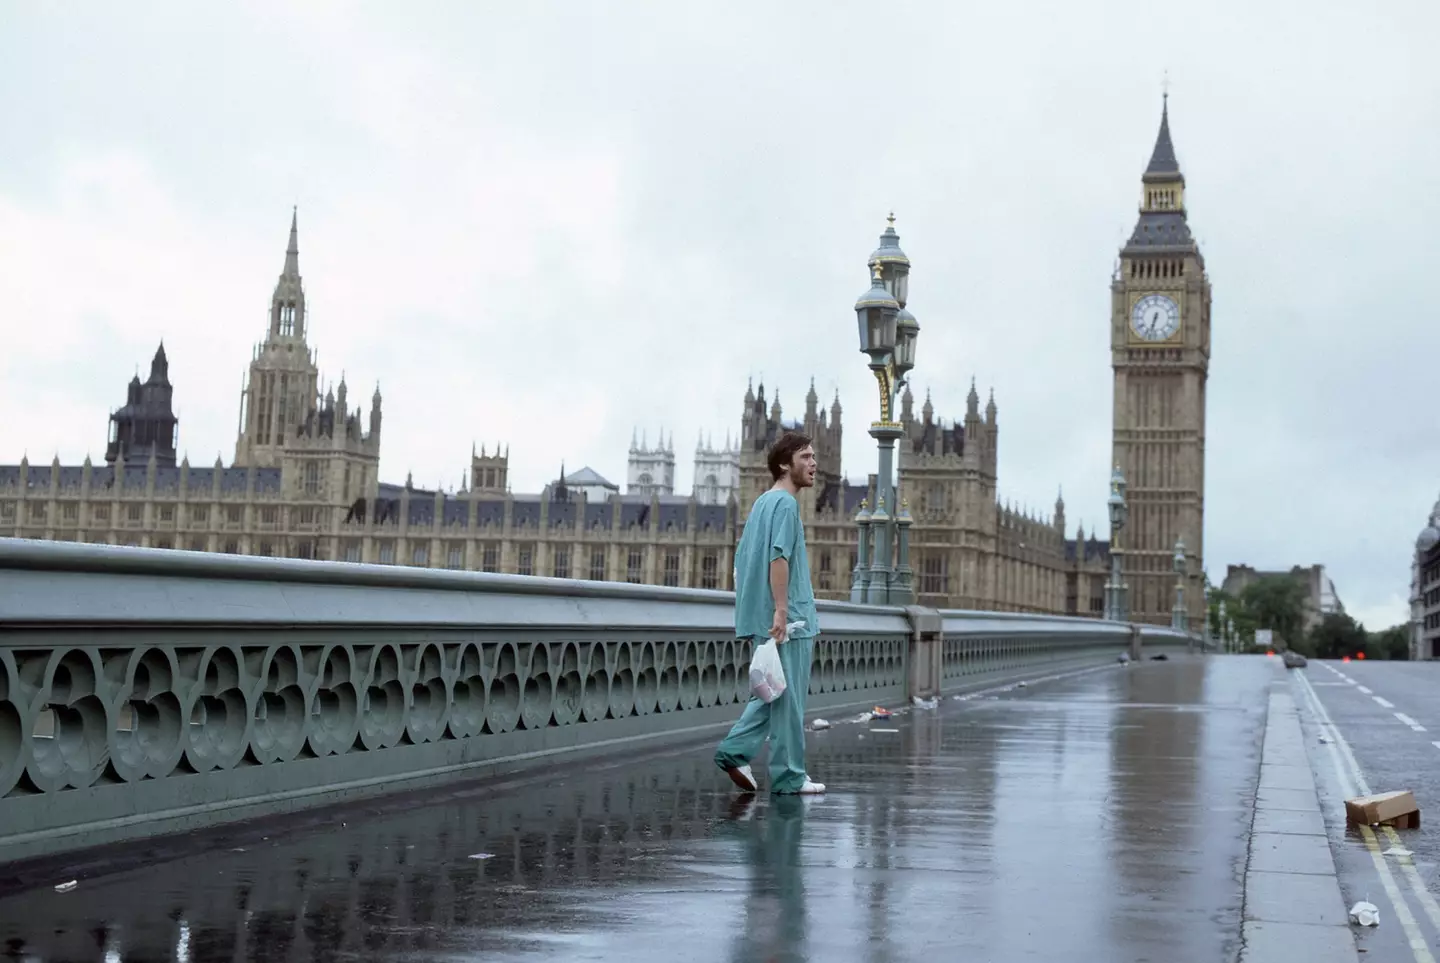 We've had 28 Days Later and 28 Weeks Later, but what about 28 Years Later?